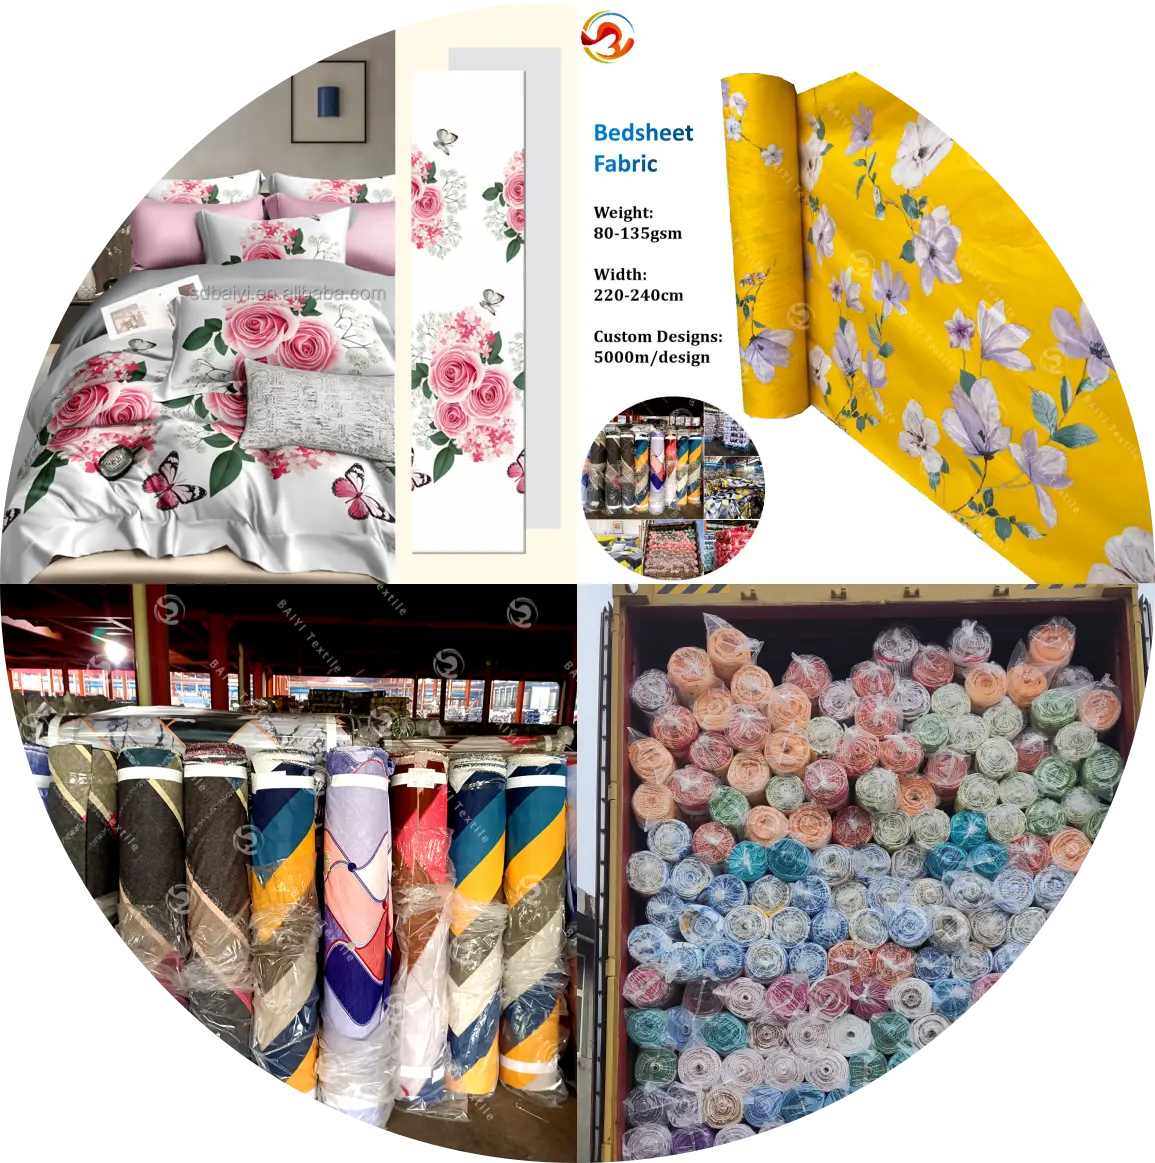 100% polyester microfiber woven brushed pigment disperse printed bed sheet peach skin curtain telas fabric textiles in roll